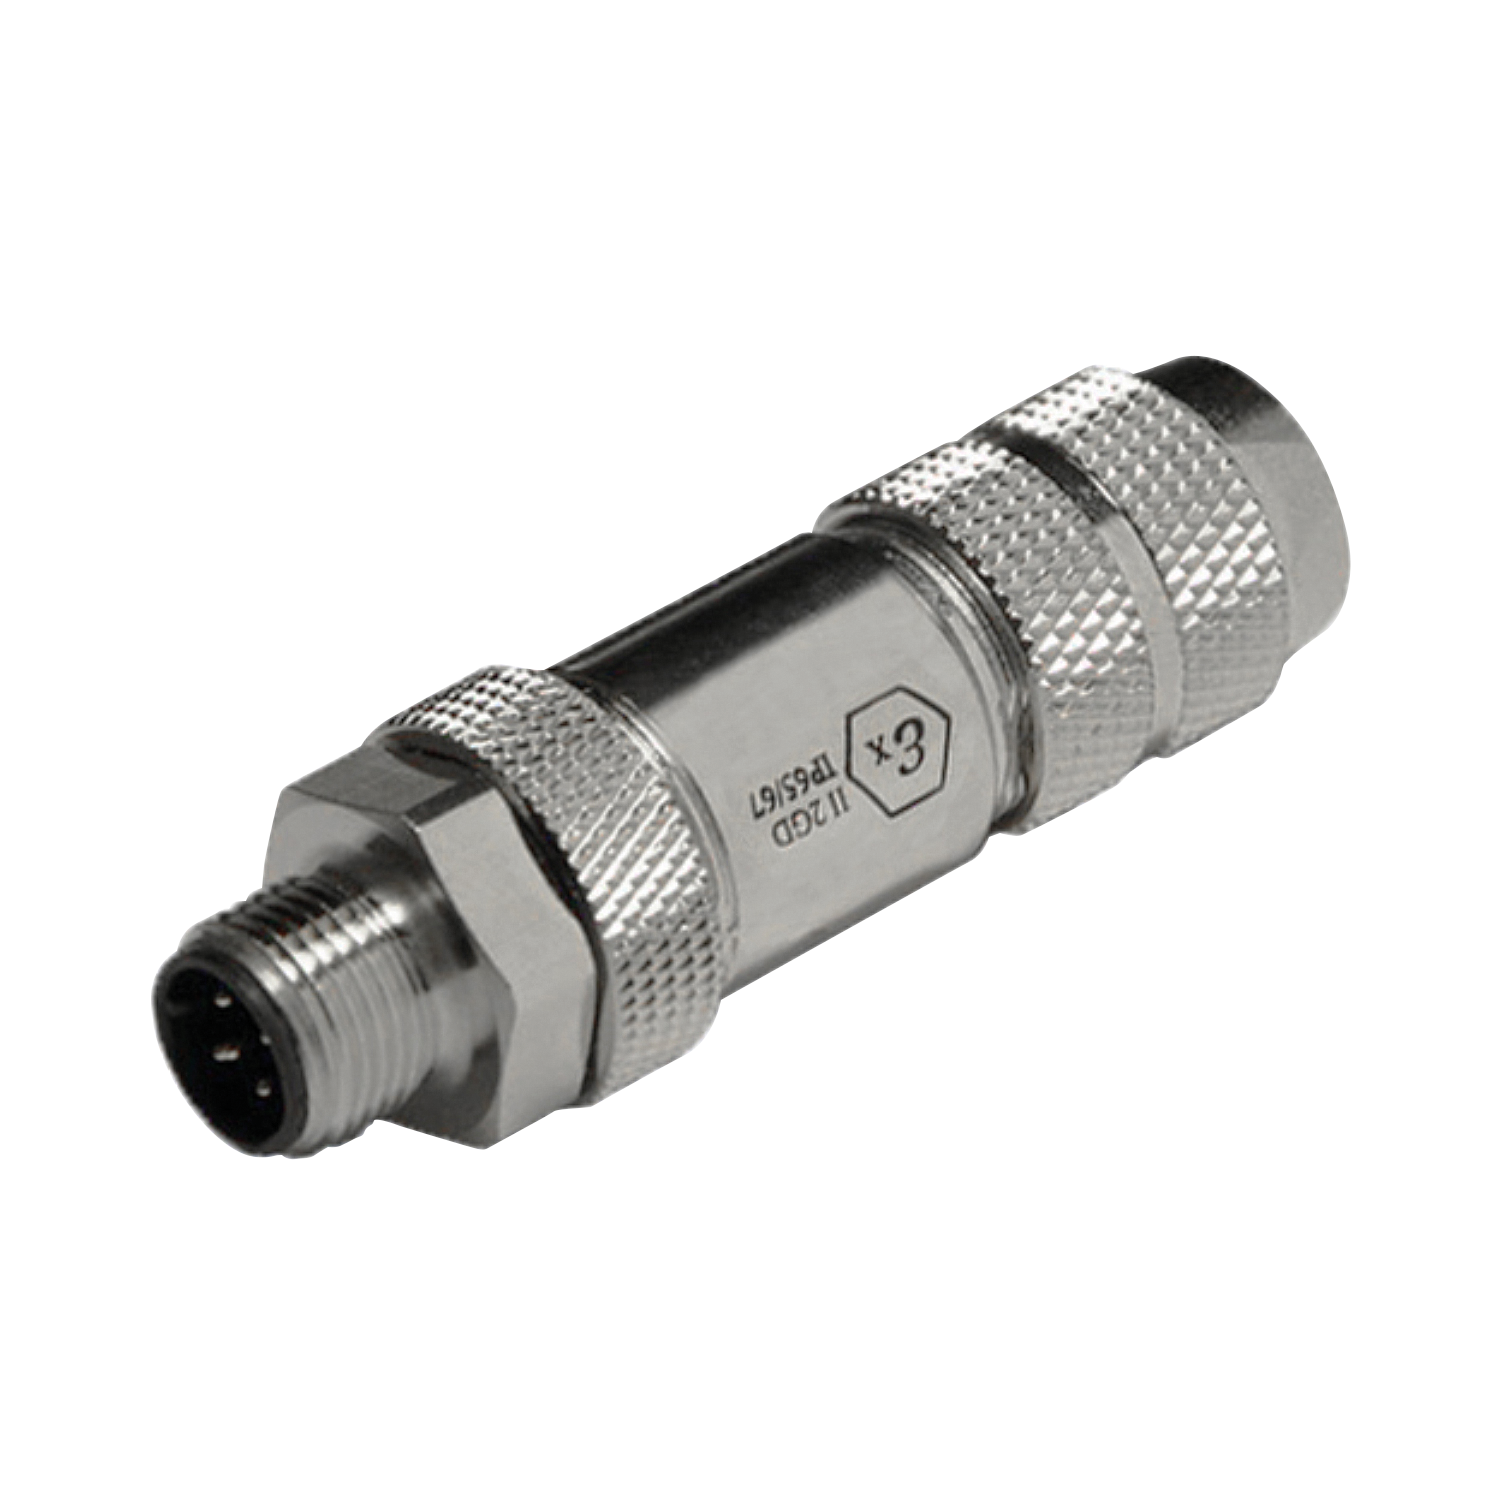 M12 Connector , for connector Ex-area Field-wireable Kübler Worldwide Group details - - Product the